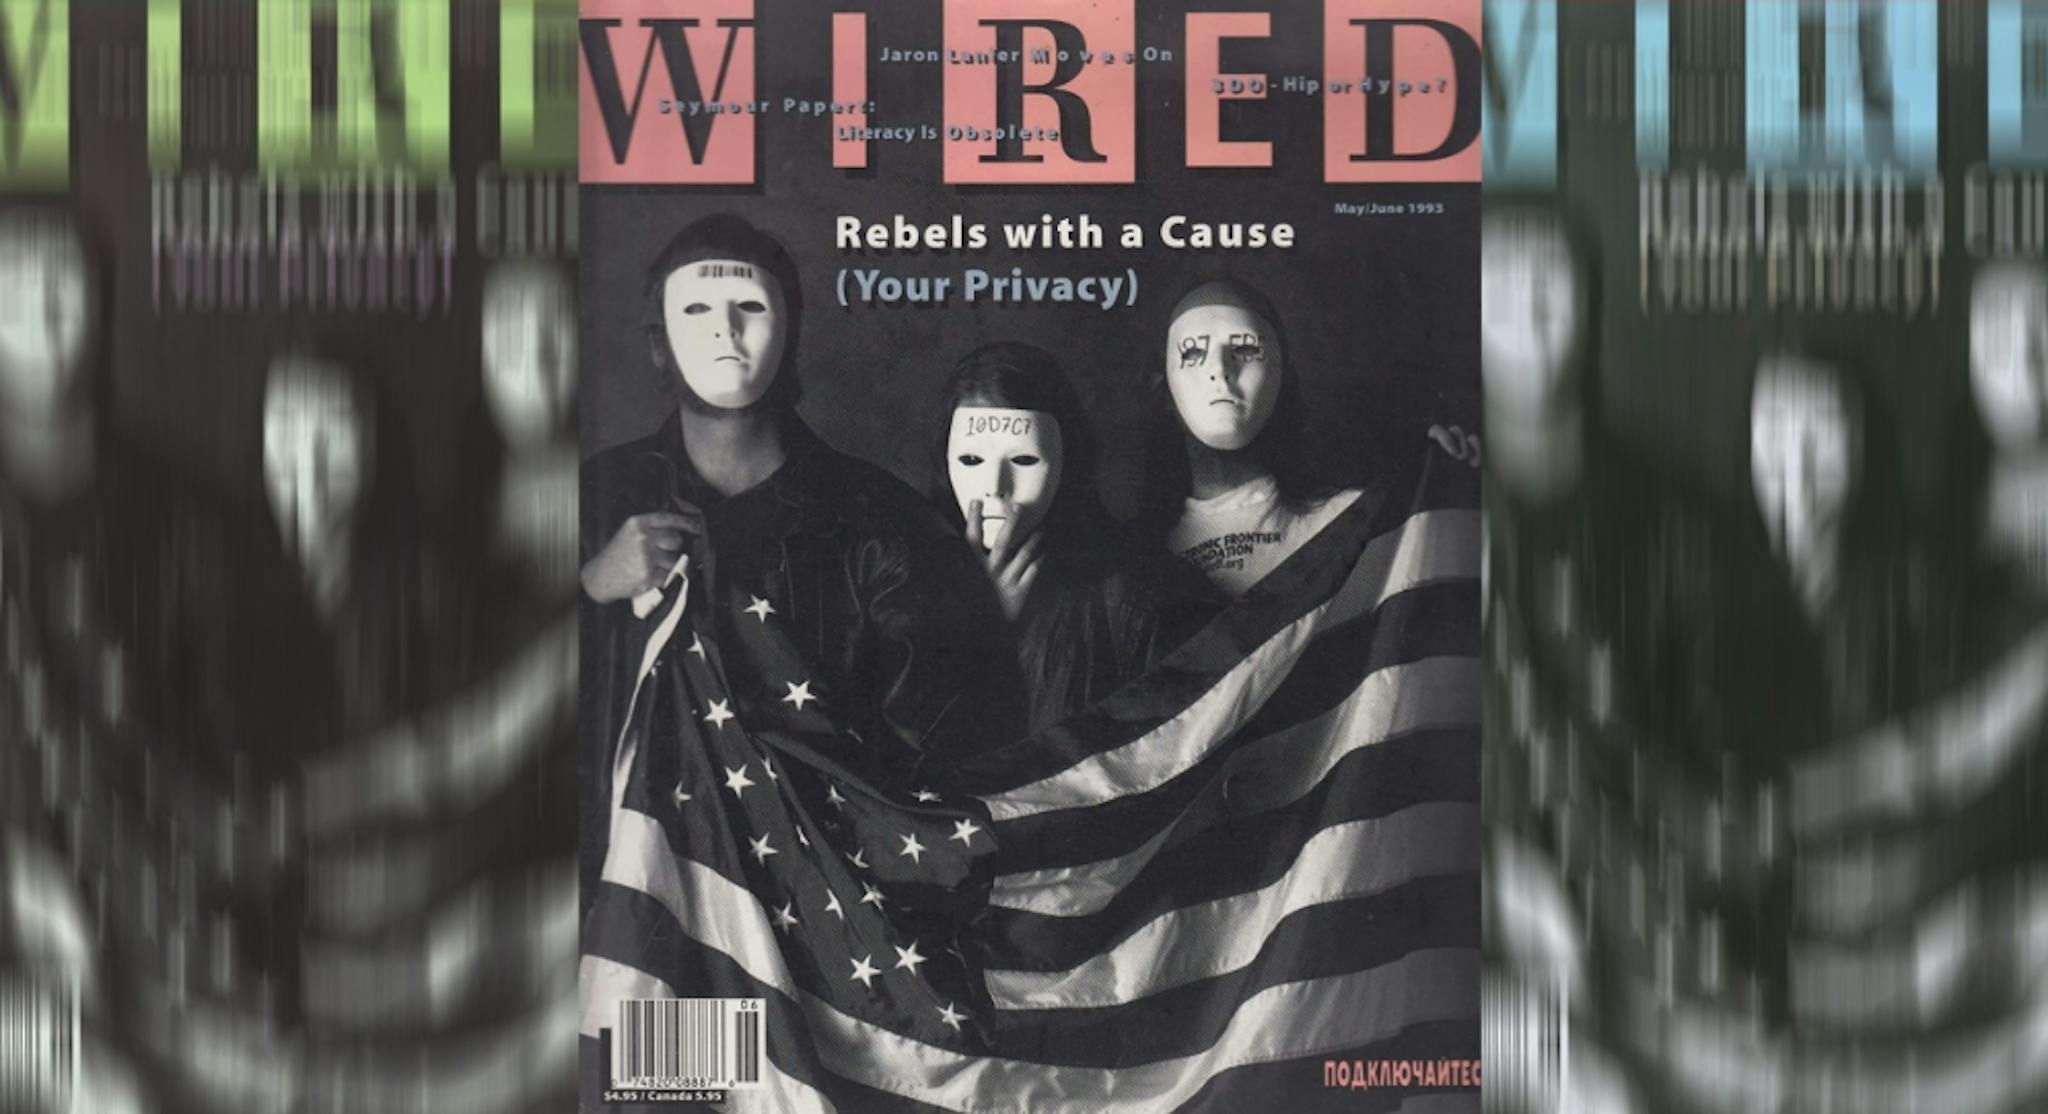 Hughes, Gilmore, and May were the masked individuals in the cover of Wired, Feb 1993. Image by CryptoArtCulture